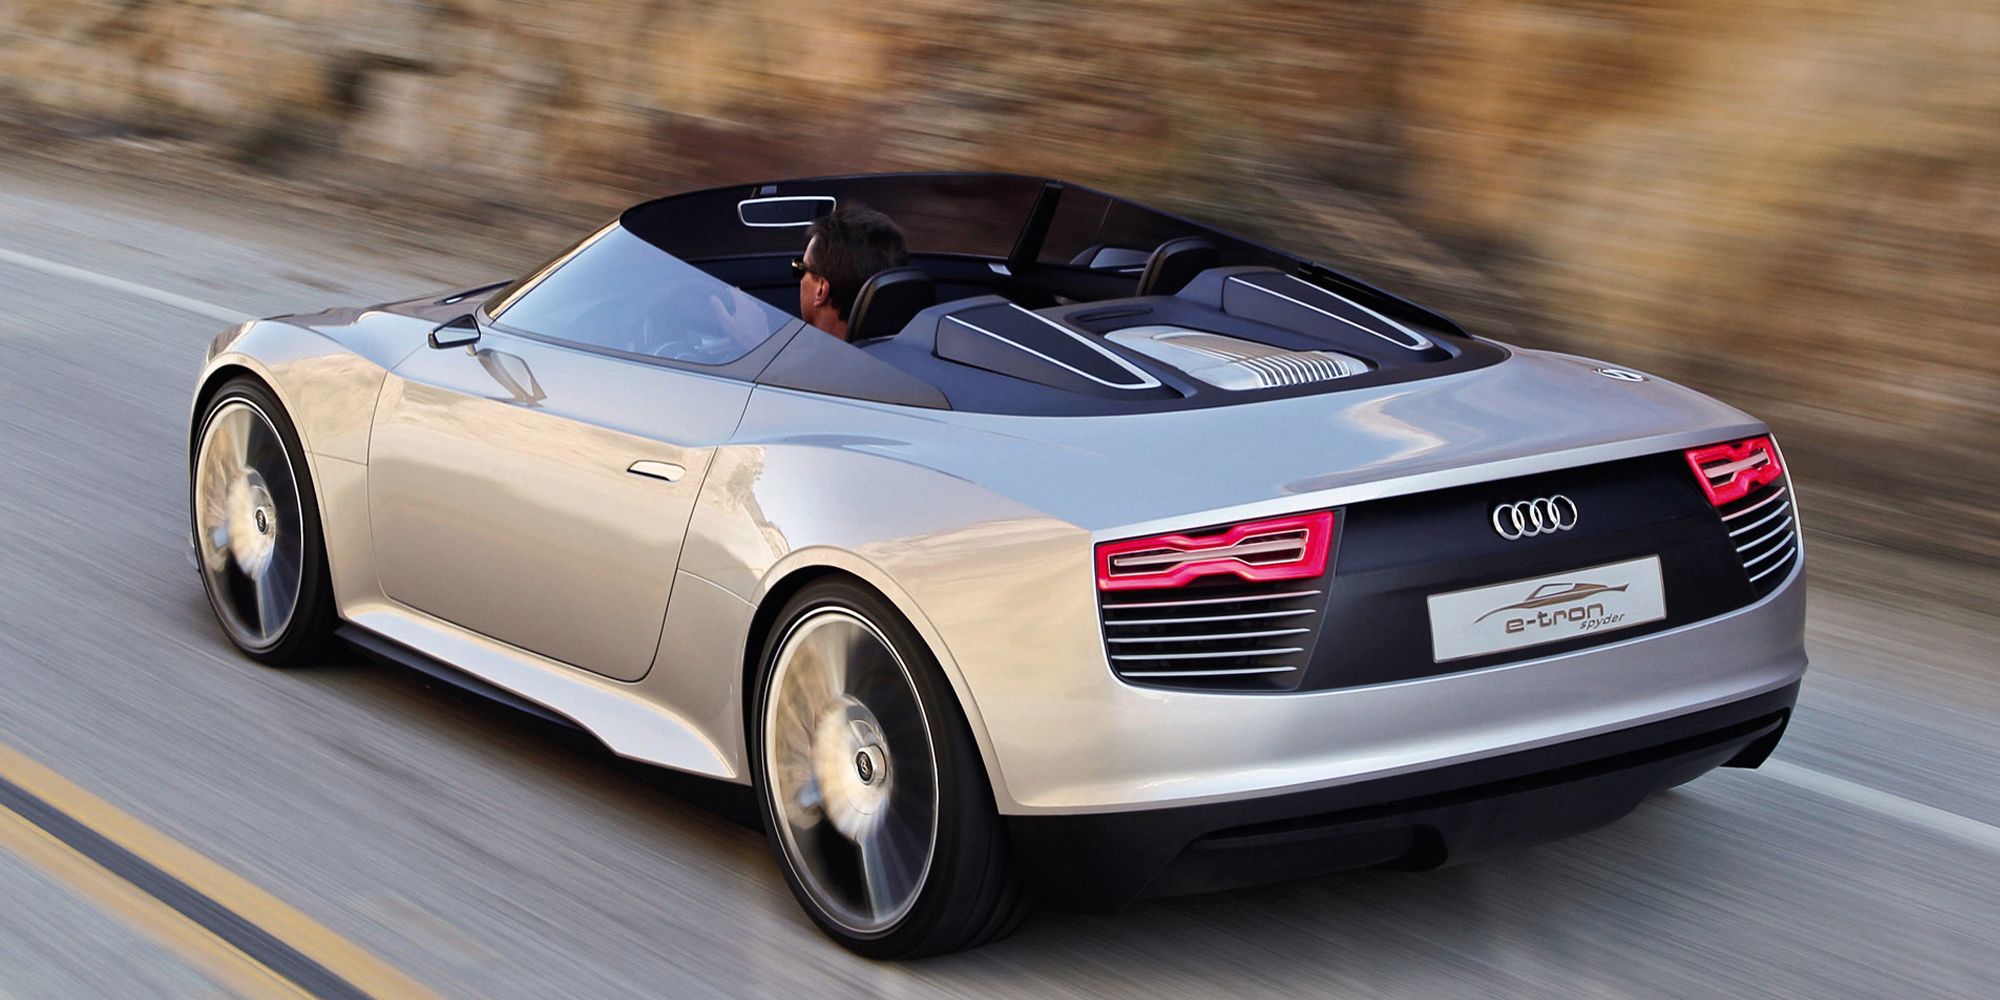 Rear view of the e-tron Spyder on the move